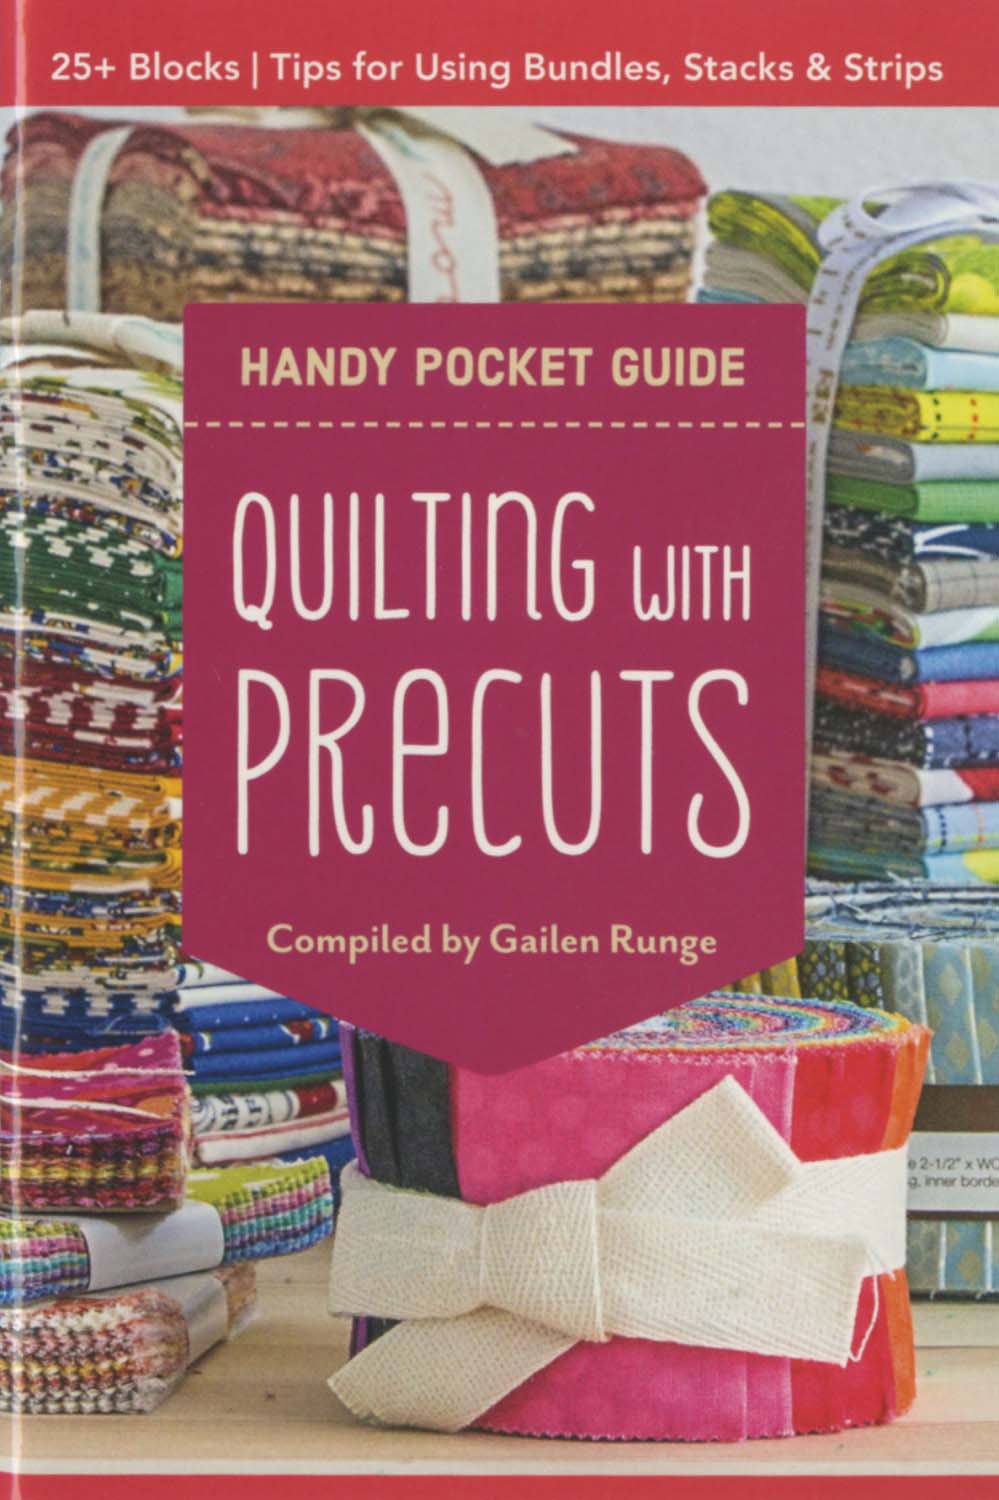 Handy Pocket Guide - Quilting With Precuts